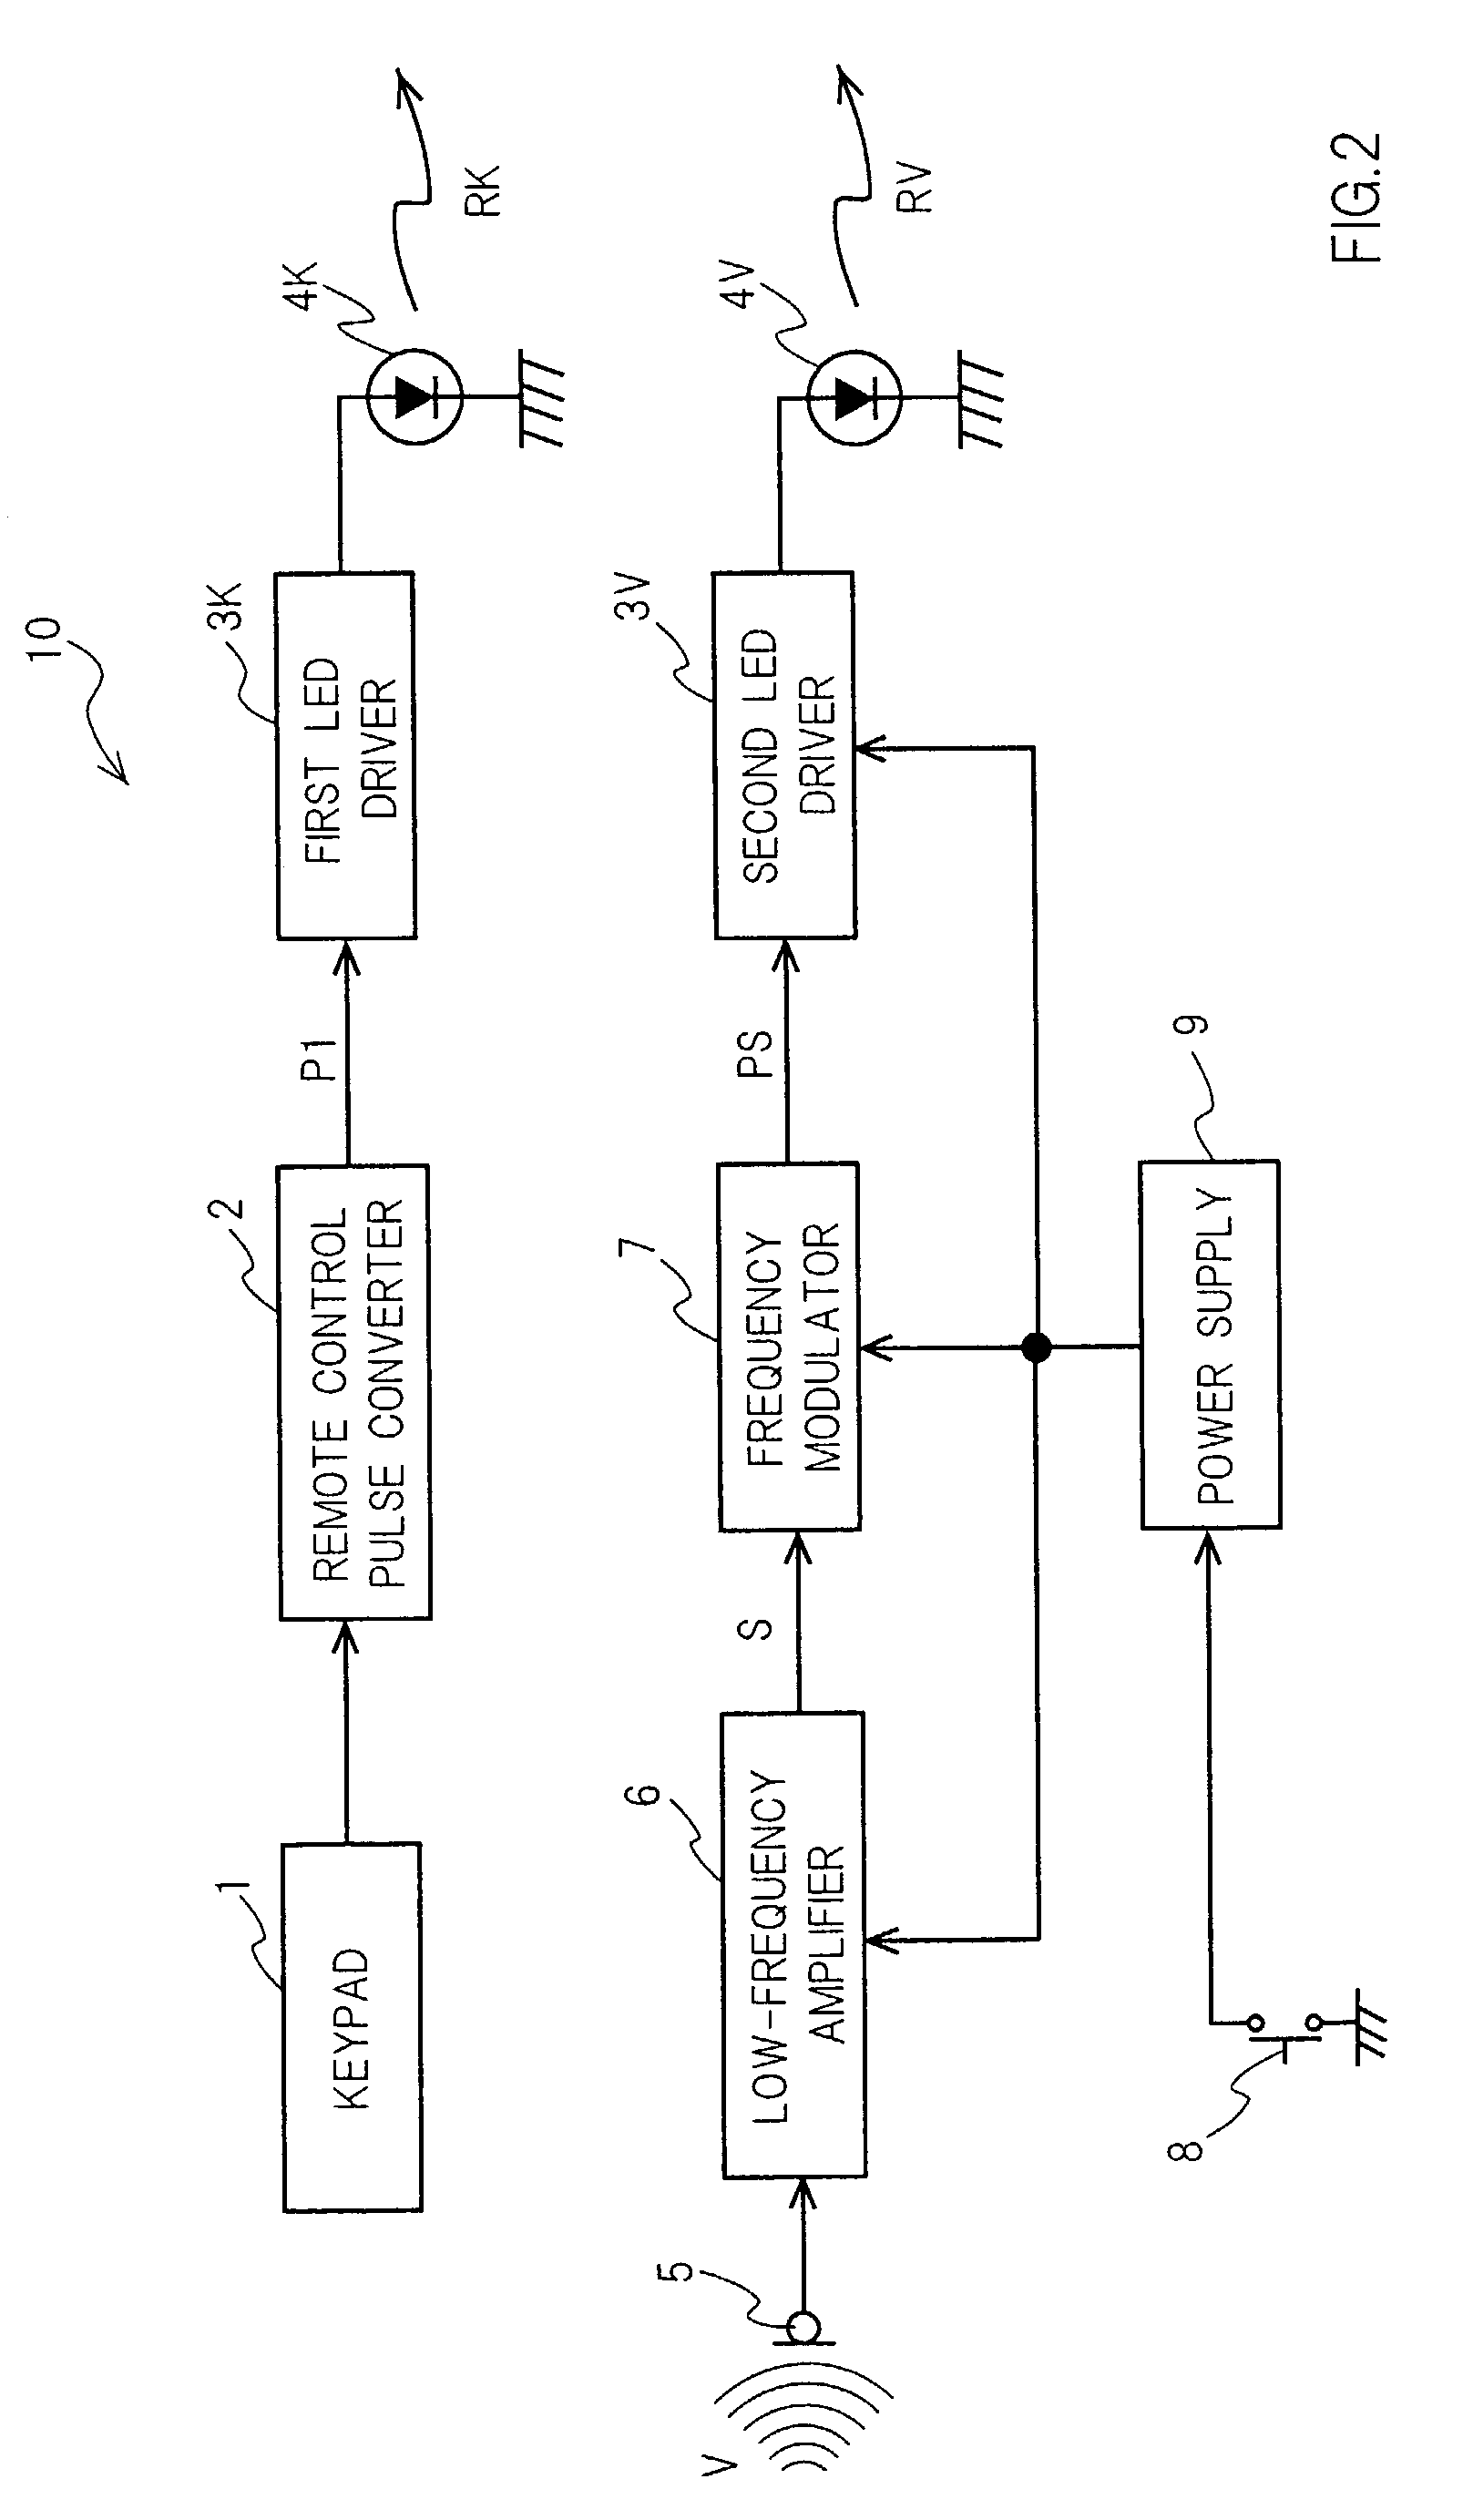 Remote-controlled apparatus, a remote control system, and a remote-controlled image-processing apparatus